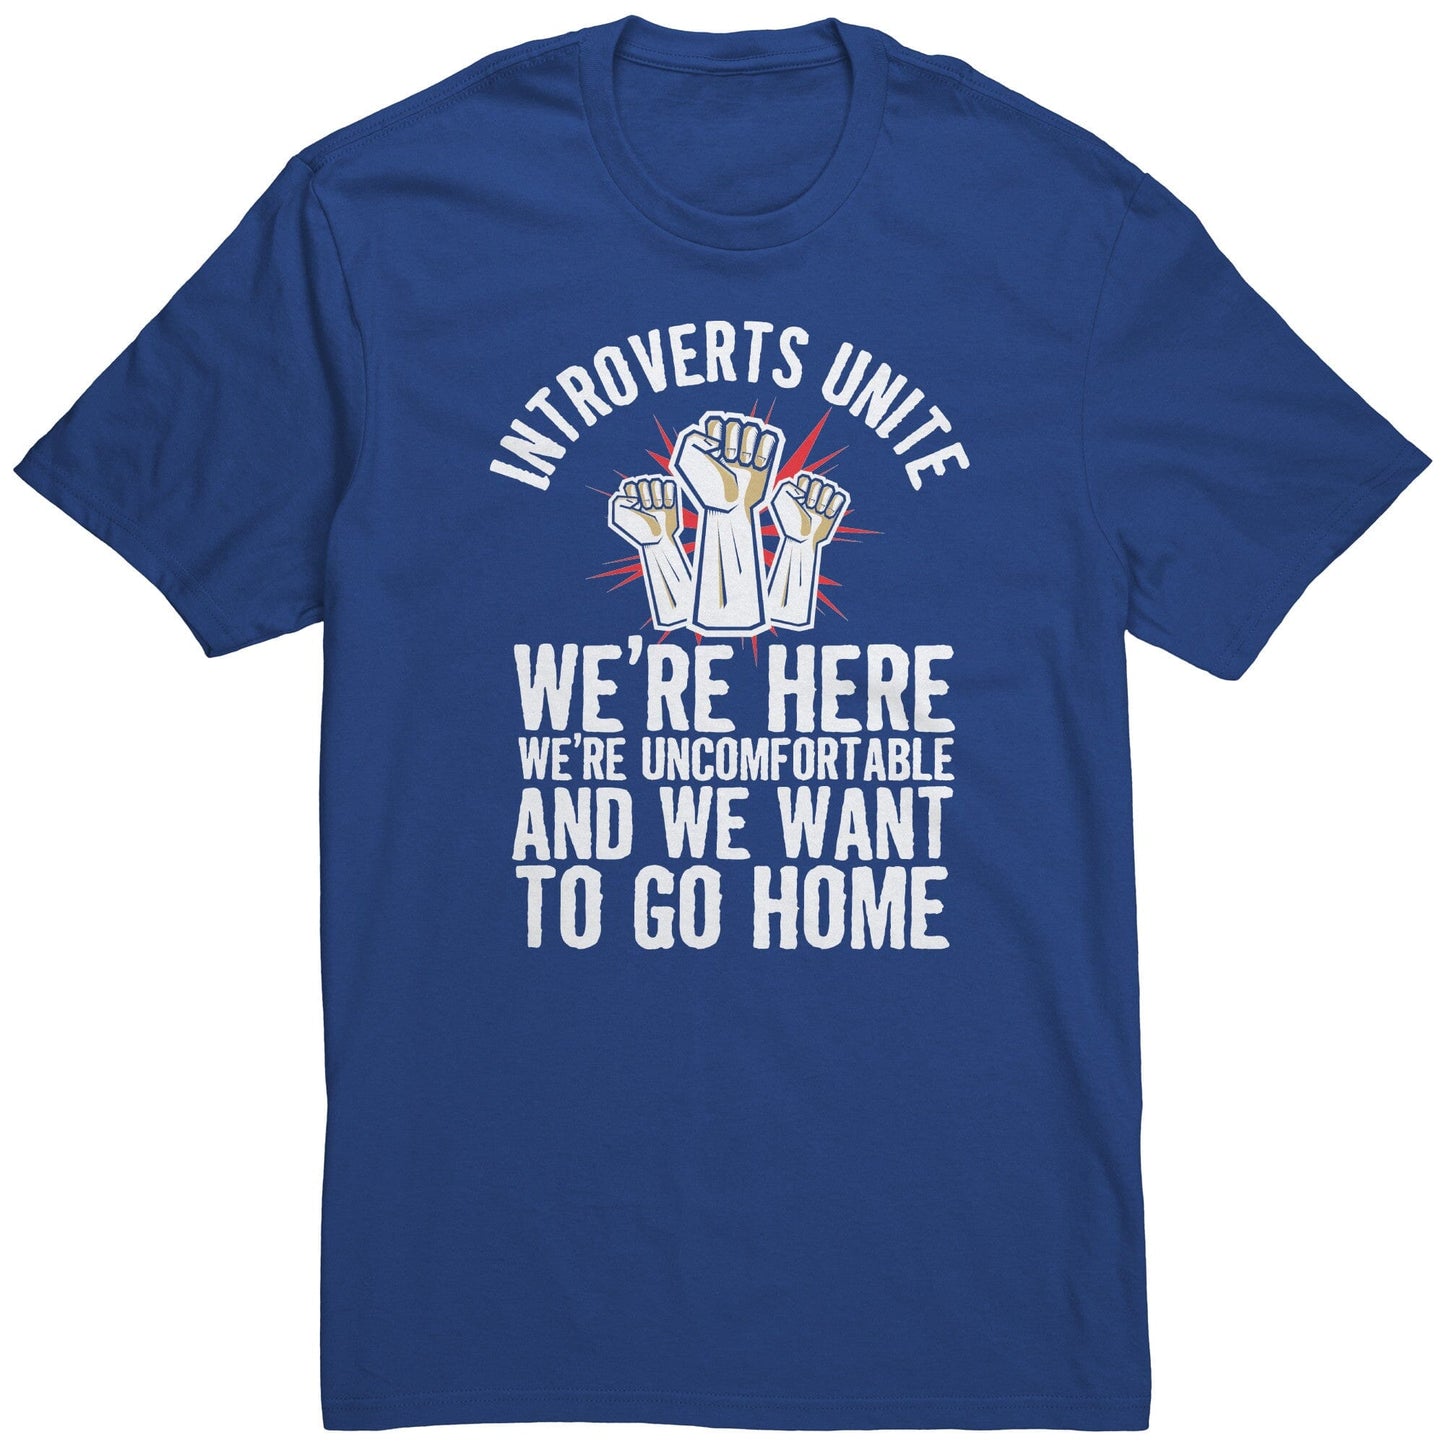 Funny "Introverts Unite - We're Here, We're Uncomfortable, and We Want To Go Home" Shirt Apparel Deep Royal S 